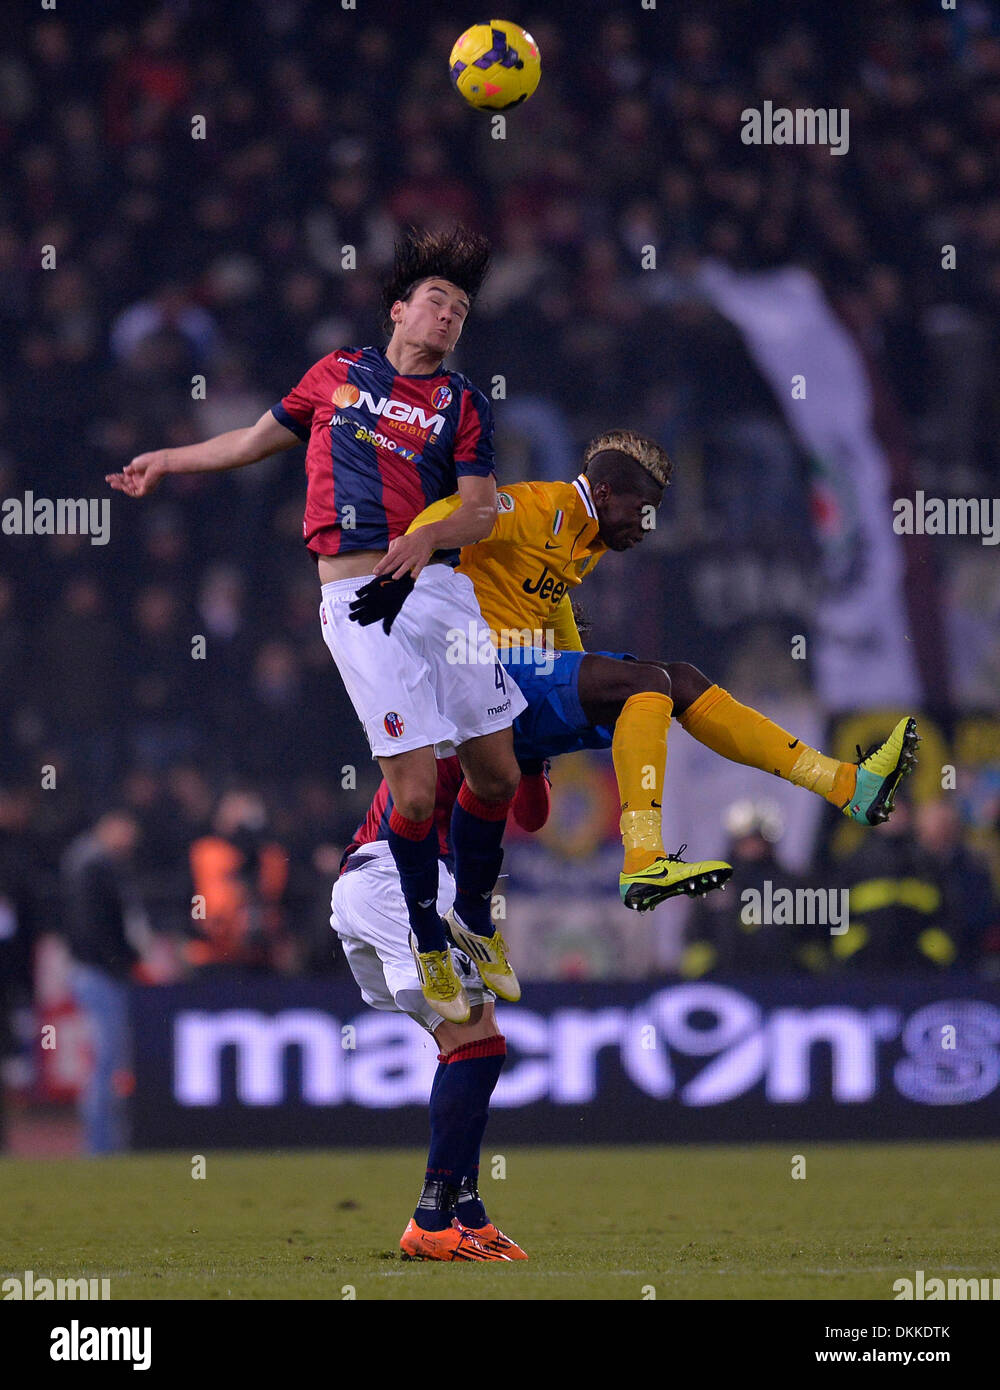 Bologna, Italy. 6thDec, 2013. Juventus' Paul Pogba (R) vies with Bologna's Rene Krhin during their Italian Serie A soccer match in Bologna, Italy, December 6, 2013. Juventus won 2-0. Credit:  Alberto Lingria/Xinhua/Alamy Live News Stock Photo